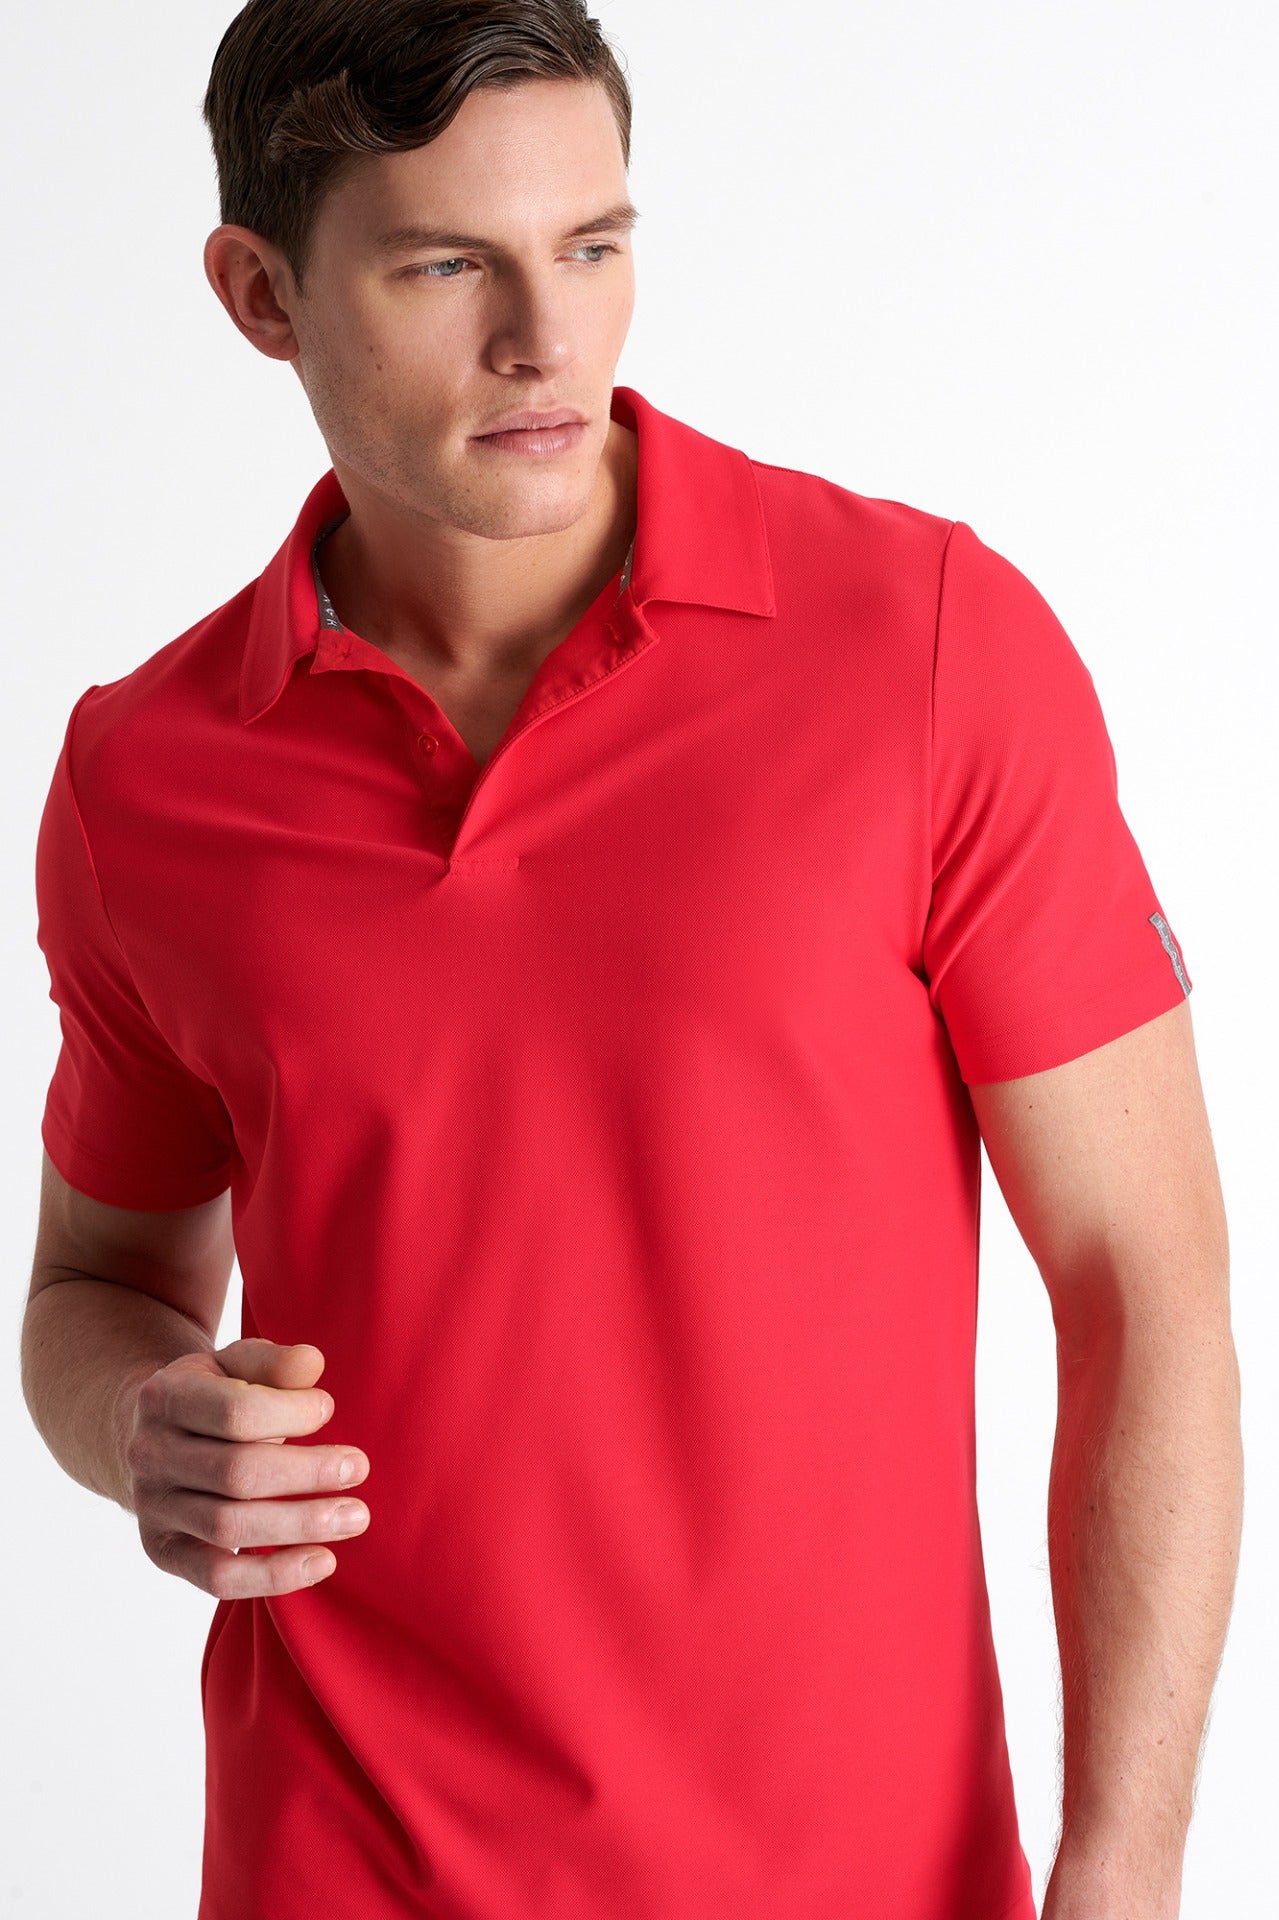 Textured Jersey Polo - 62313-47-320